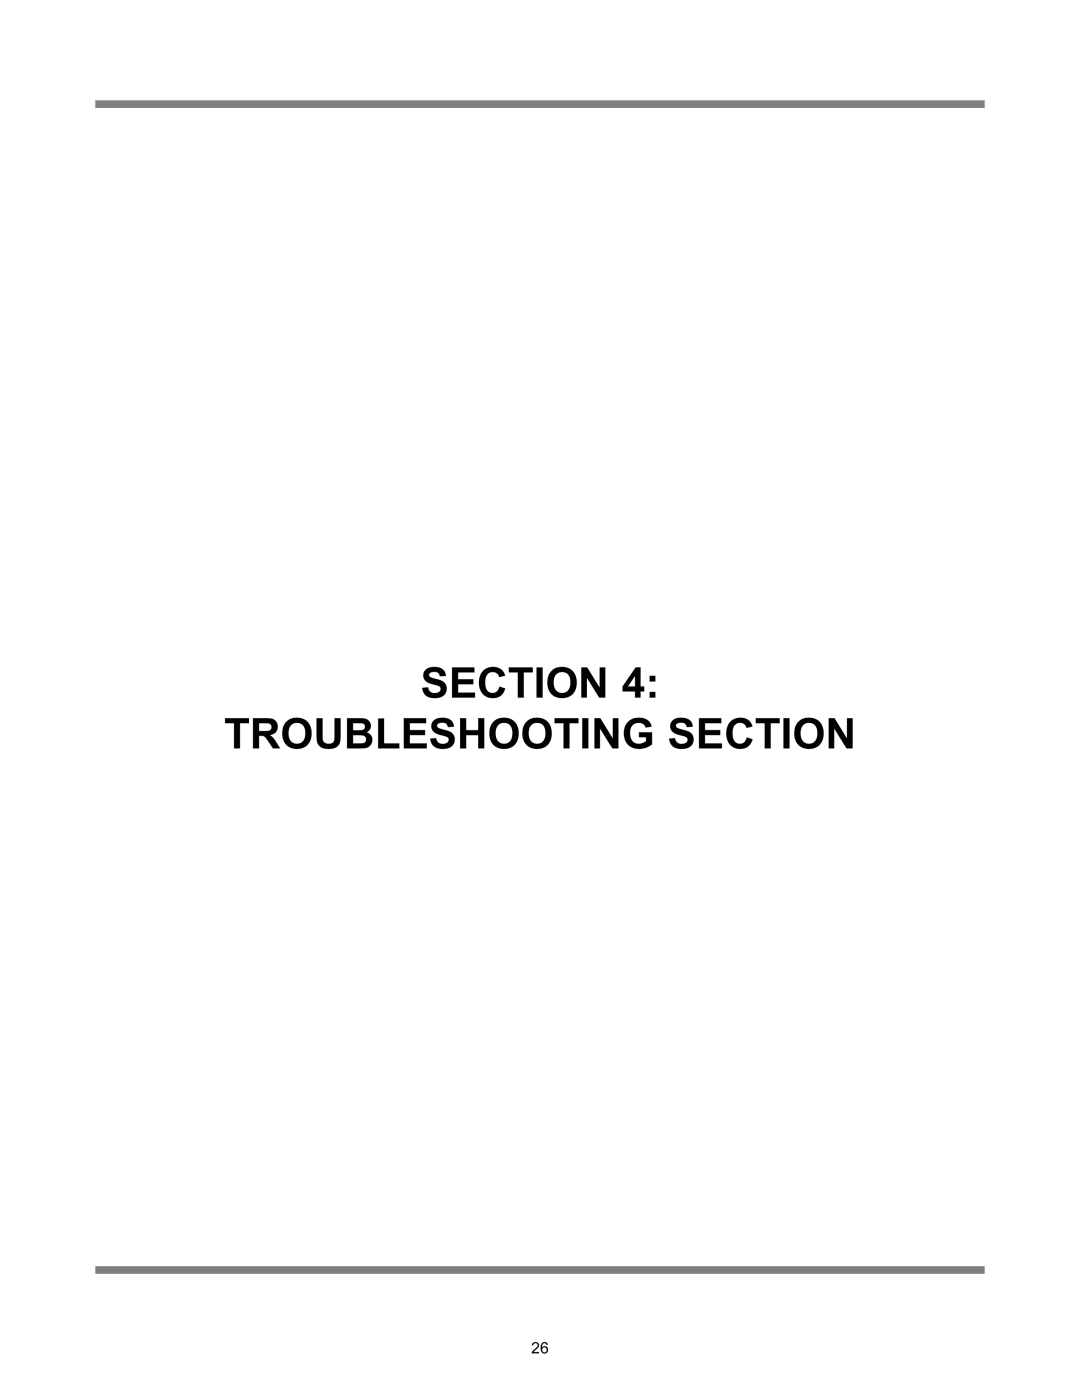 Jackson JFT-S technical manual Section Troubleshooting Section 